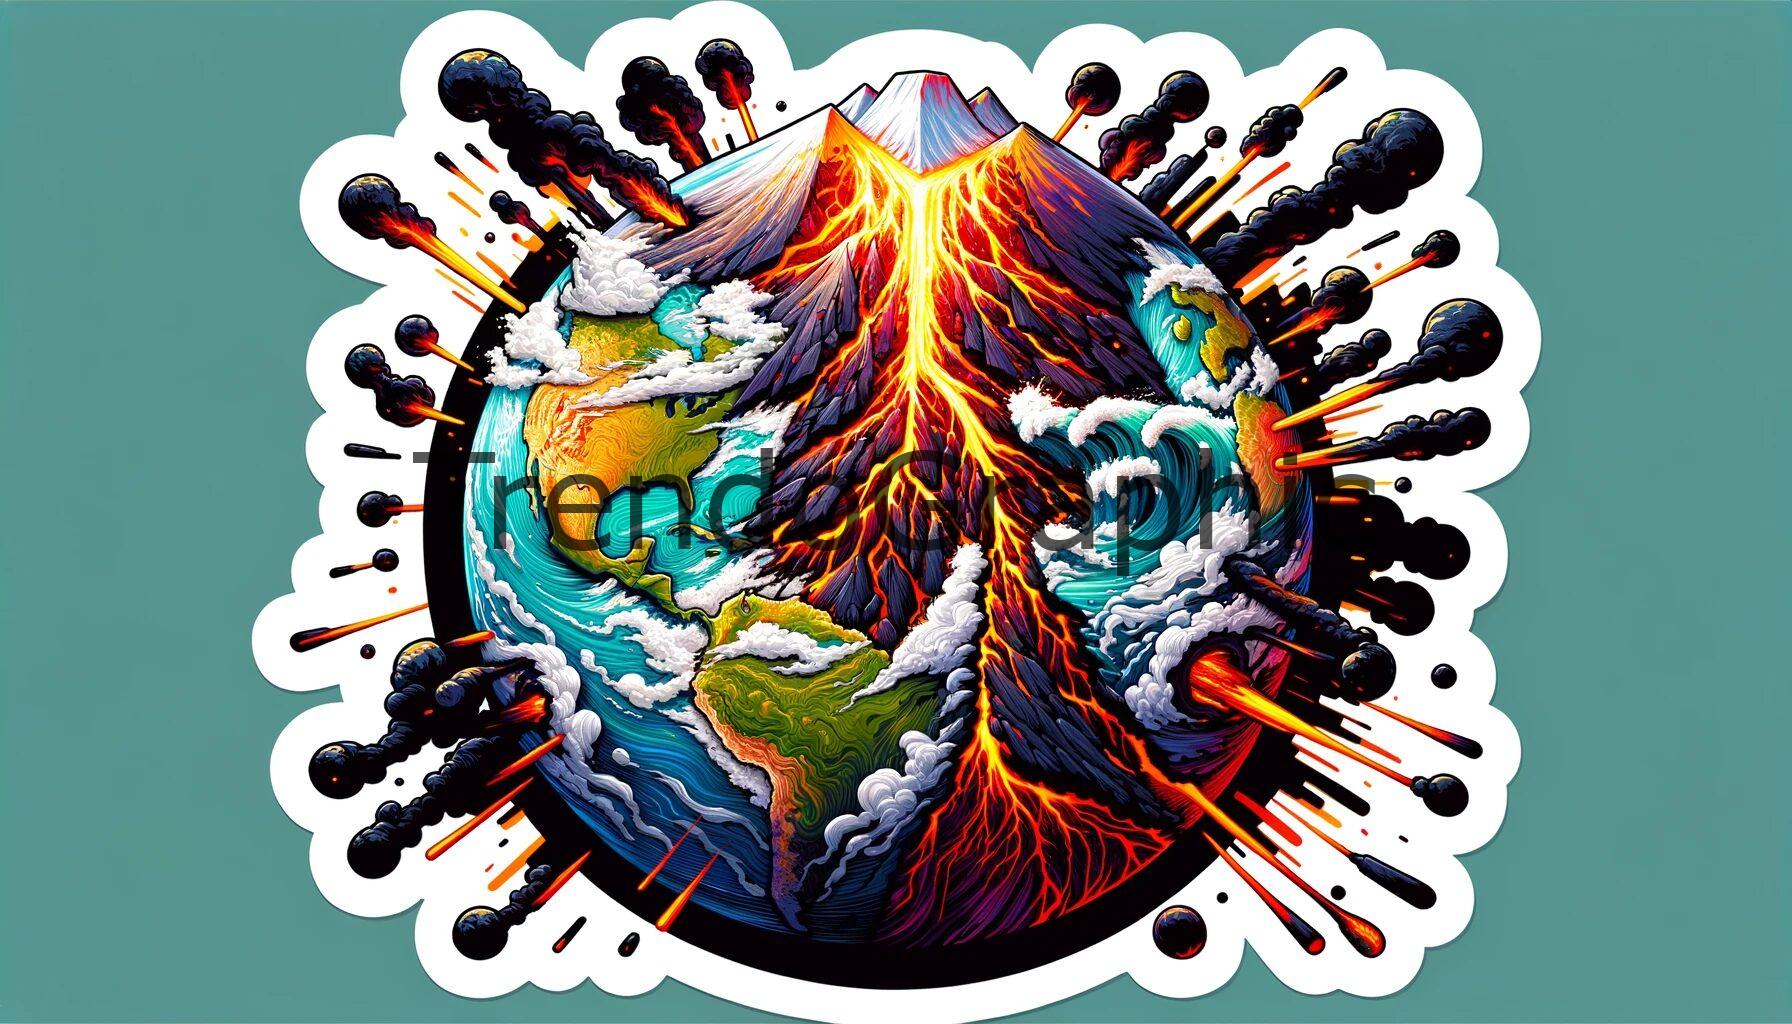 Planetary Fury: Witnessing the Power of Geological Upheaval